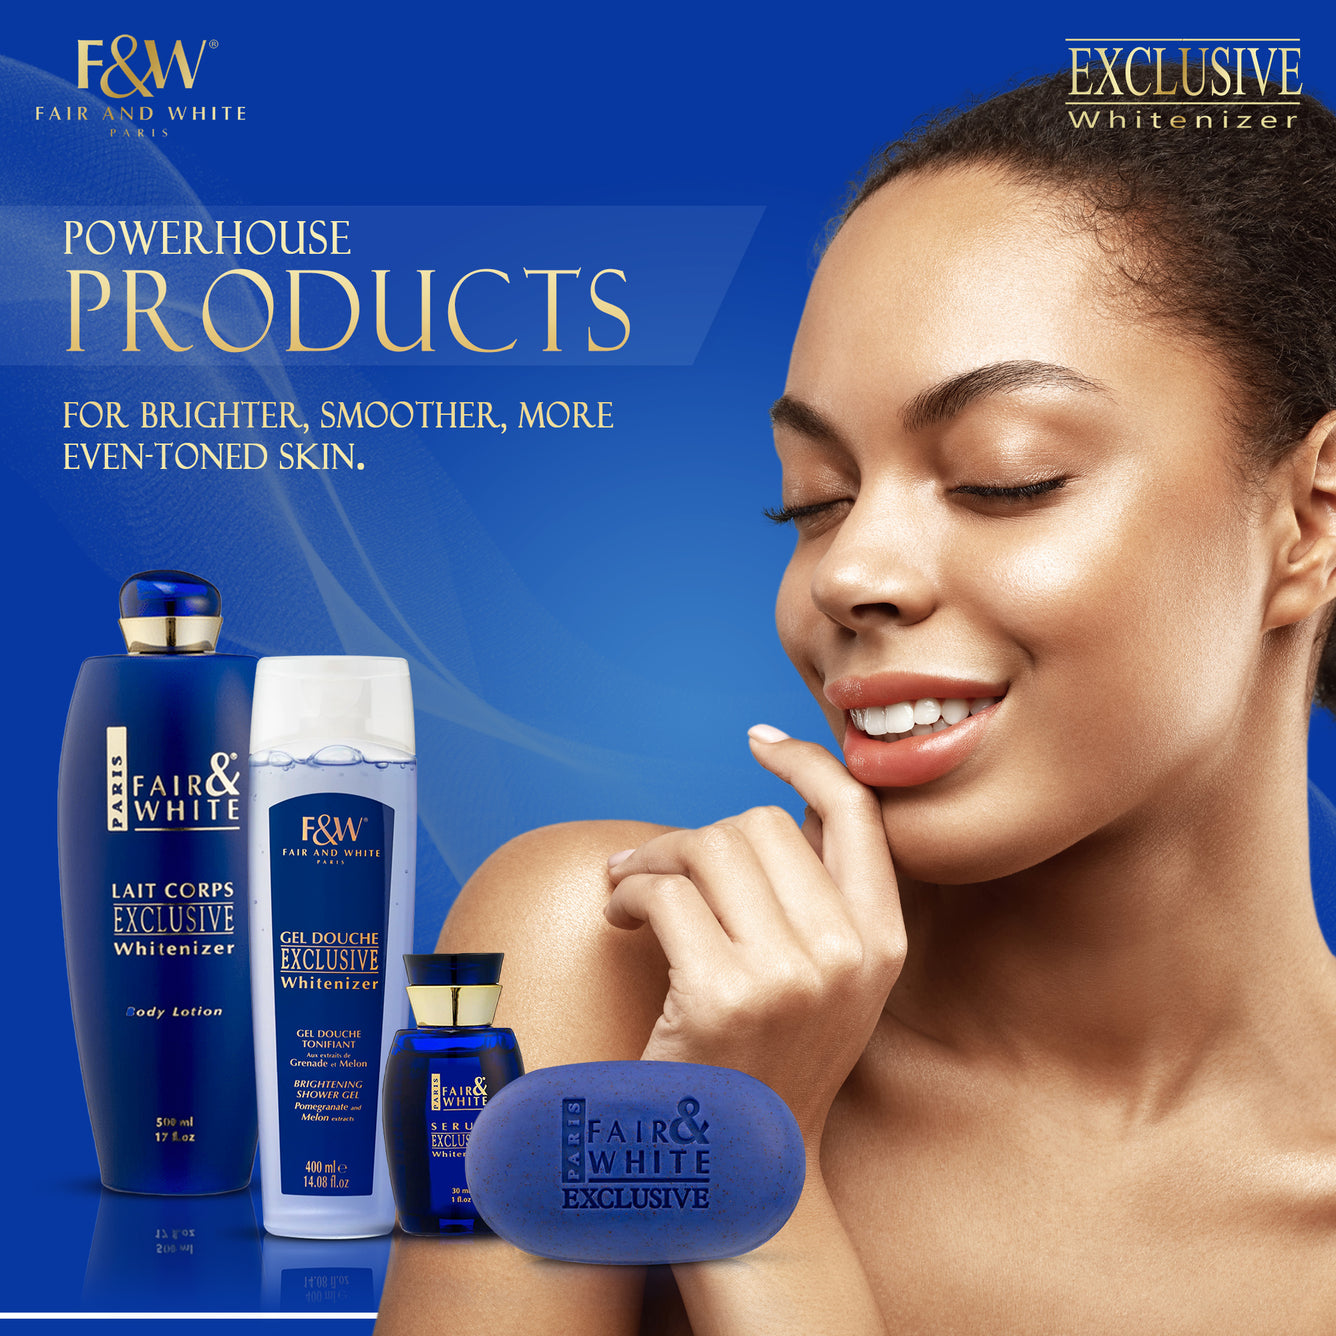 Fair & White Exclusive Bundle Mitchell Brands - Mitchell Brands - Skin Lightening, Skin Brightening, Fade Dark Spots, Shea Butter, Hair Growth Products